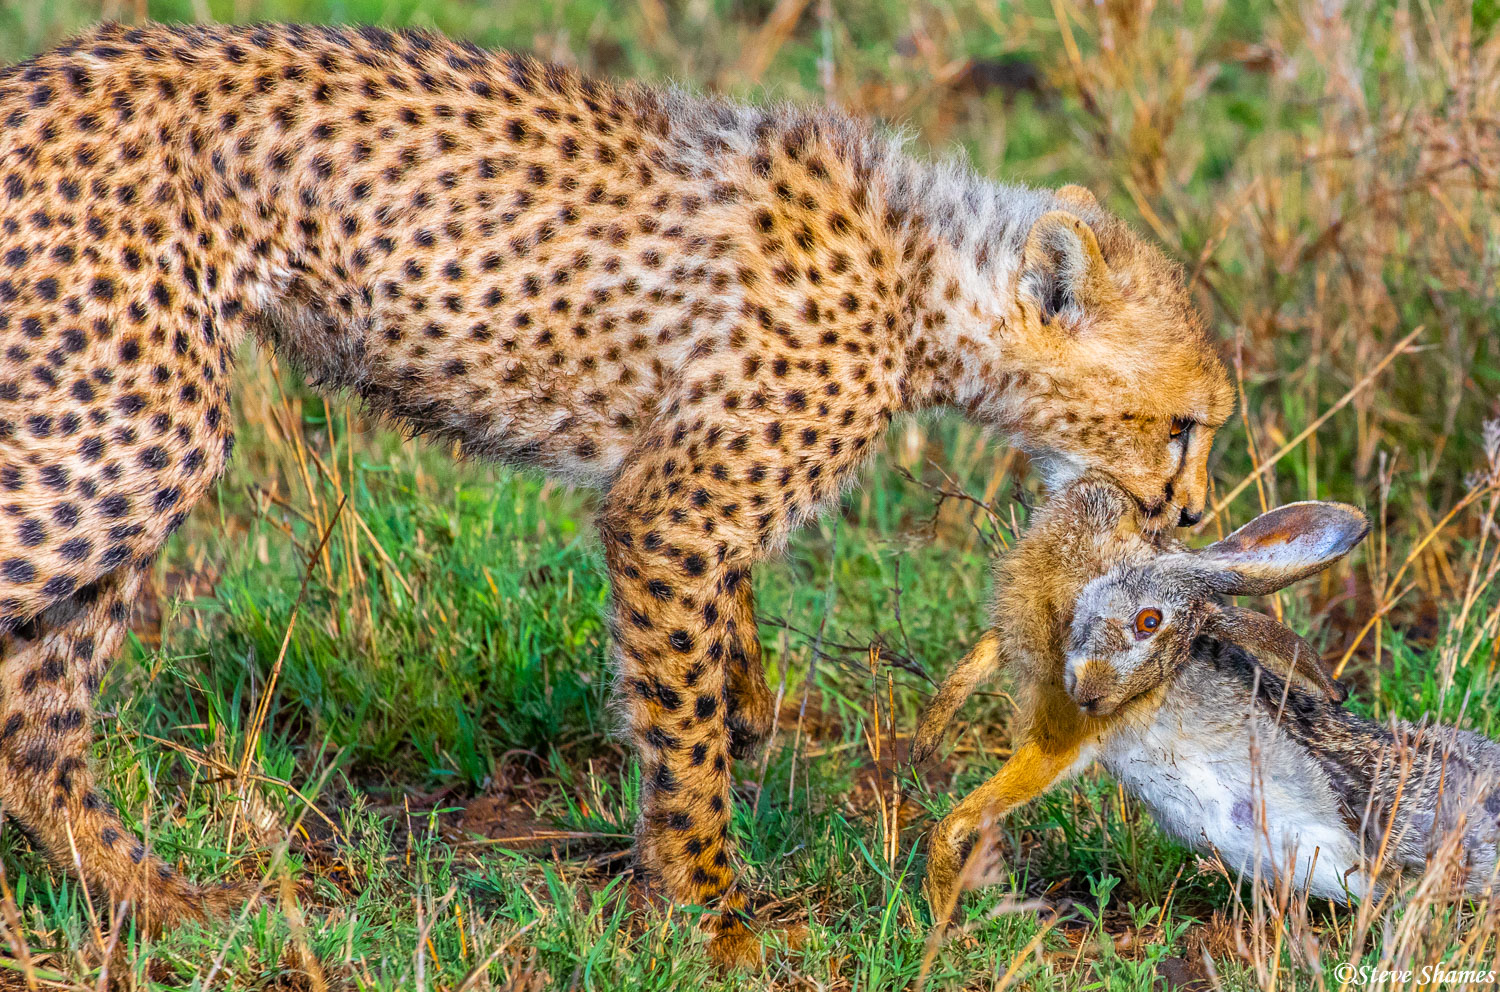 The cheetah cub could hardly wait to get his jaws around the rabbit, for a little fun before eating.